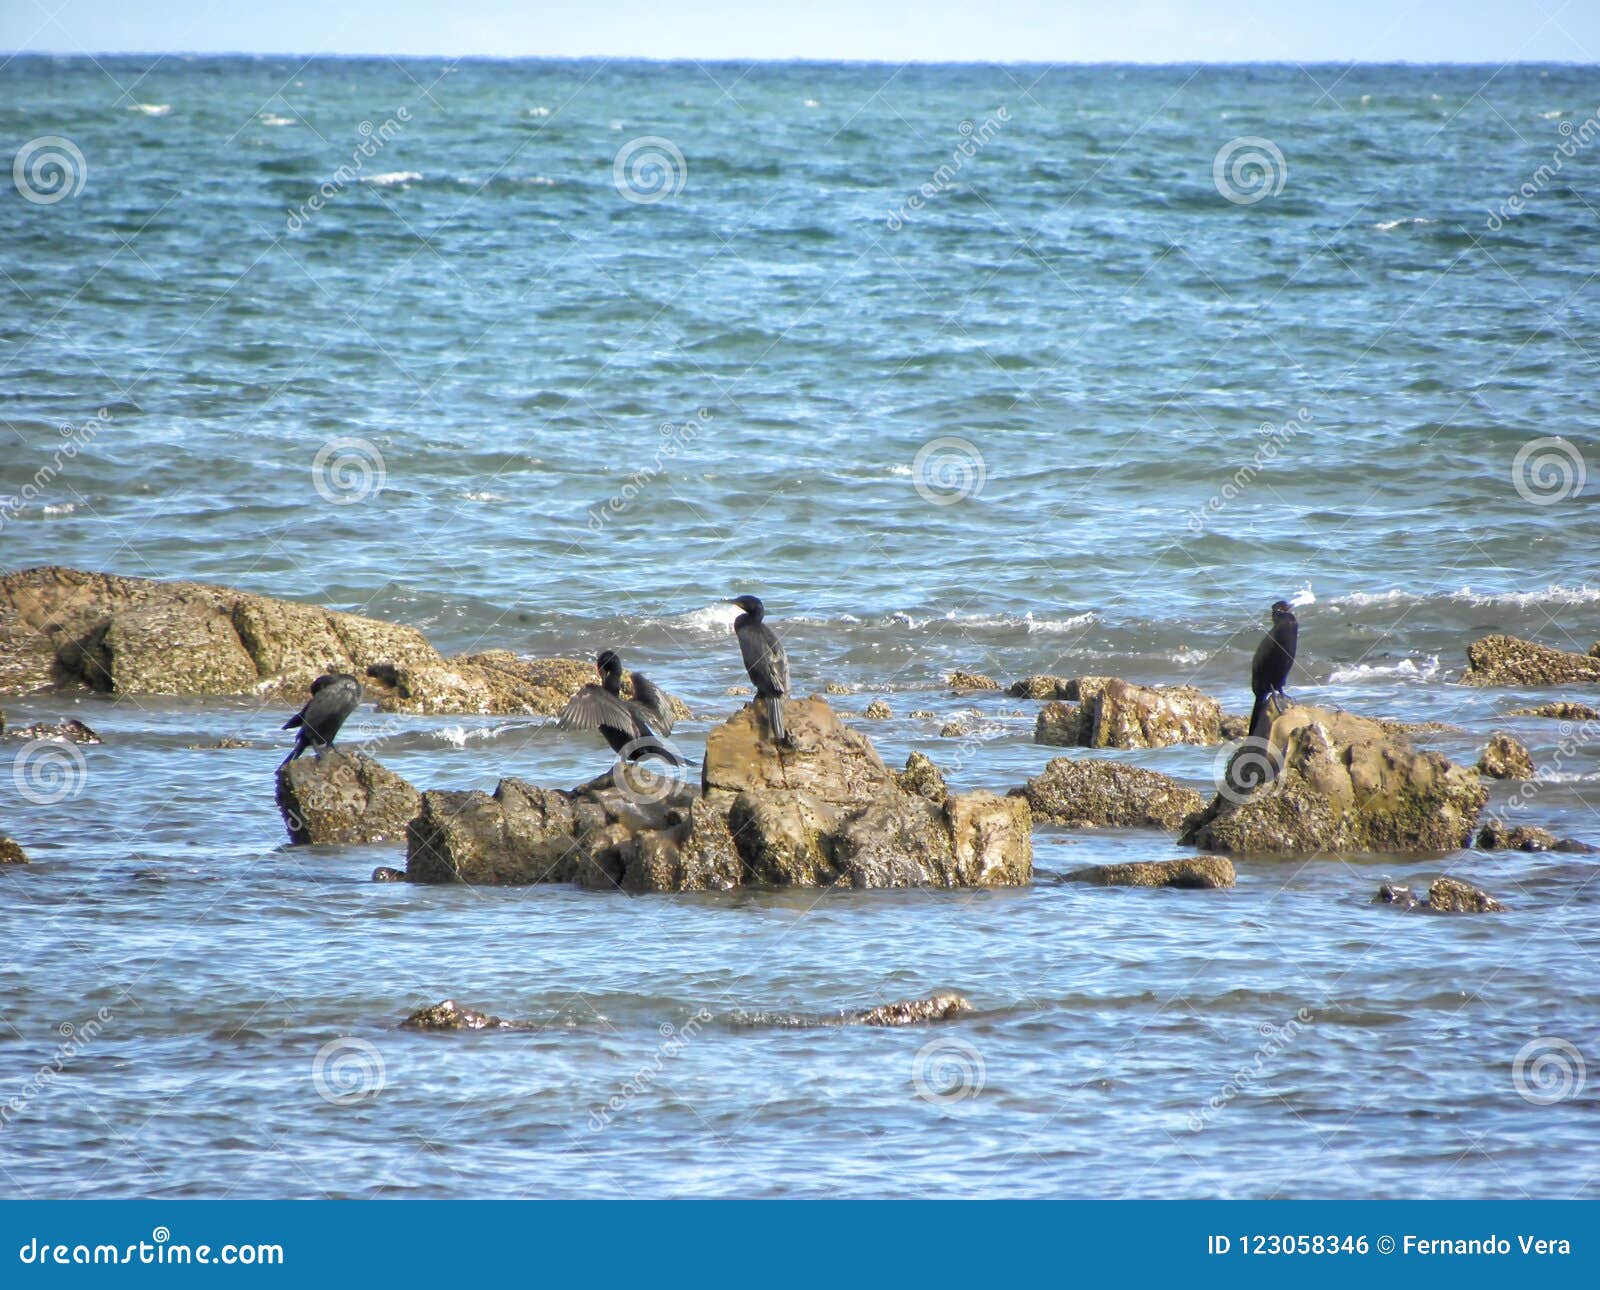 a group of olivaceous cormorants